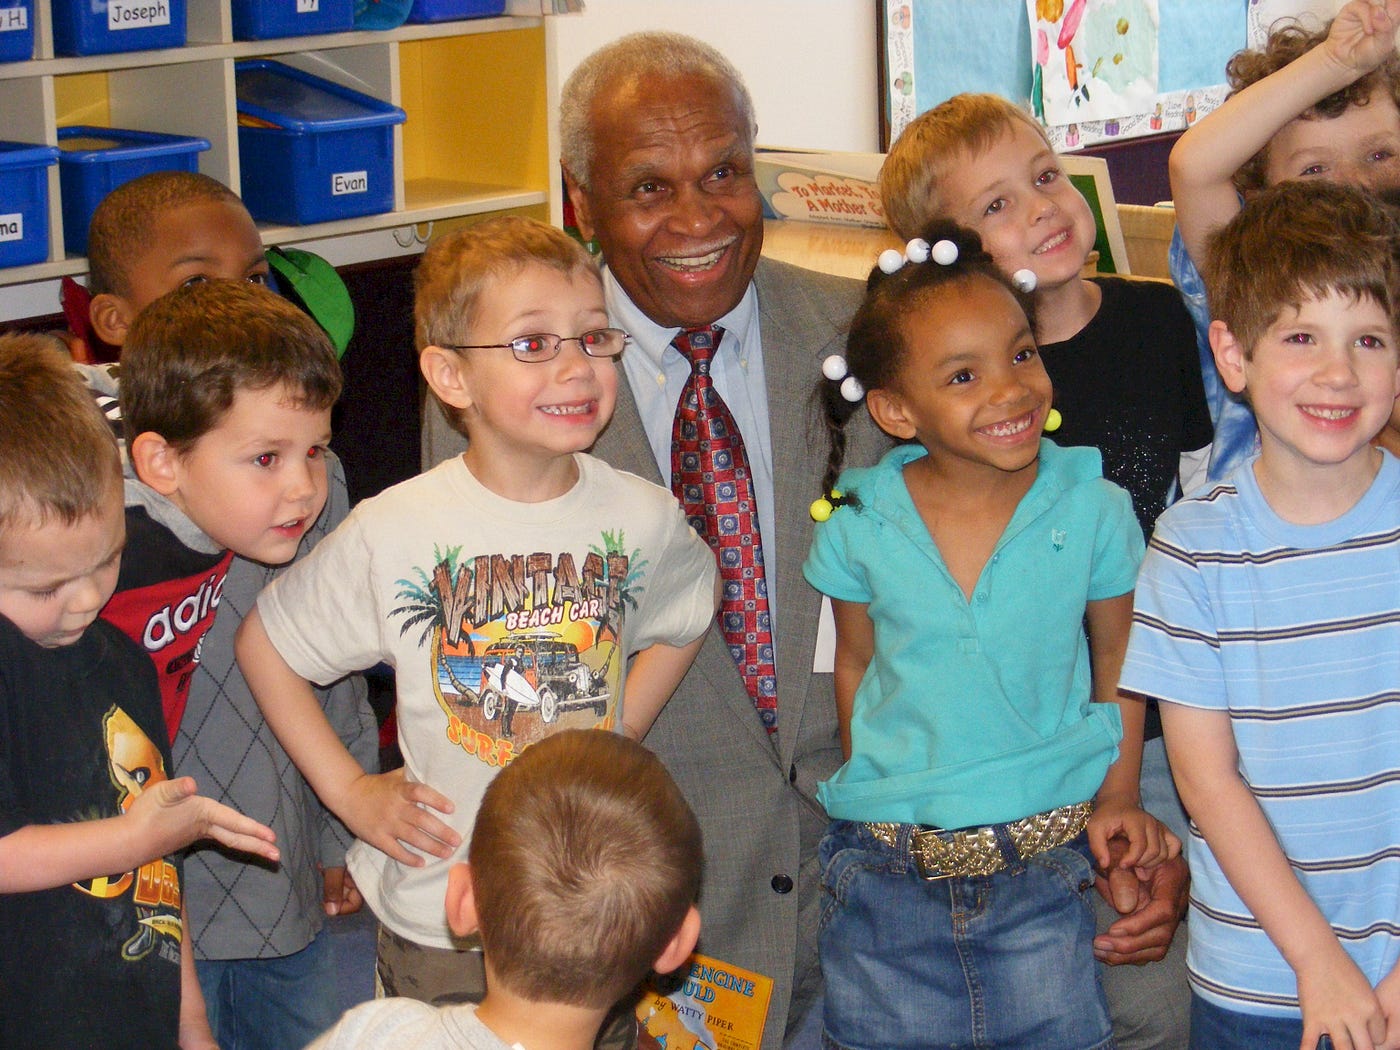 Tom Taylor surrounded by children during a visit to a Pennsylvania early childhood center.